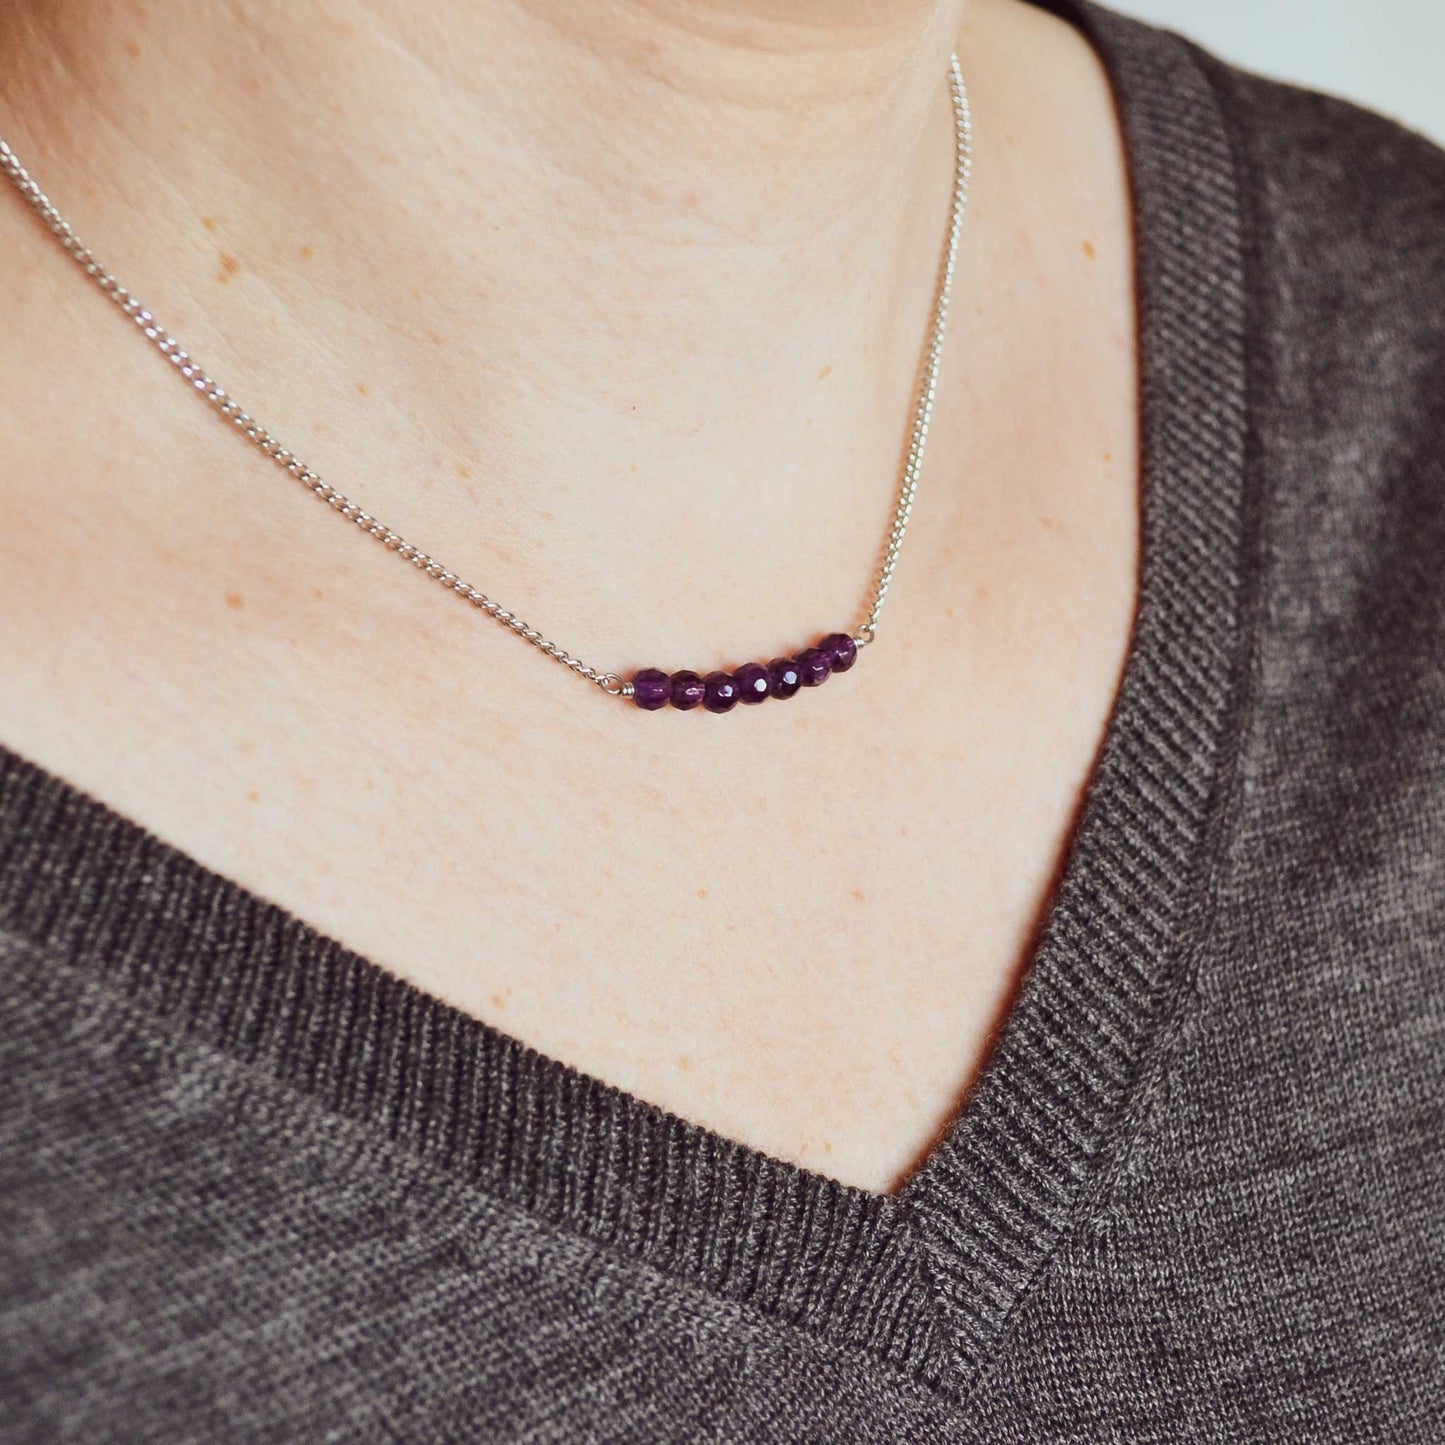 Woman wearing grey v neck jumper and dainty purple Amethyst necklace